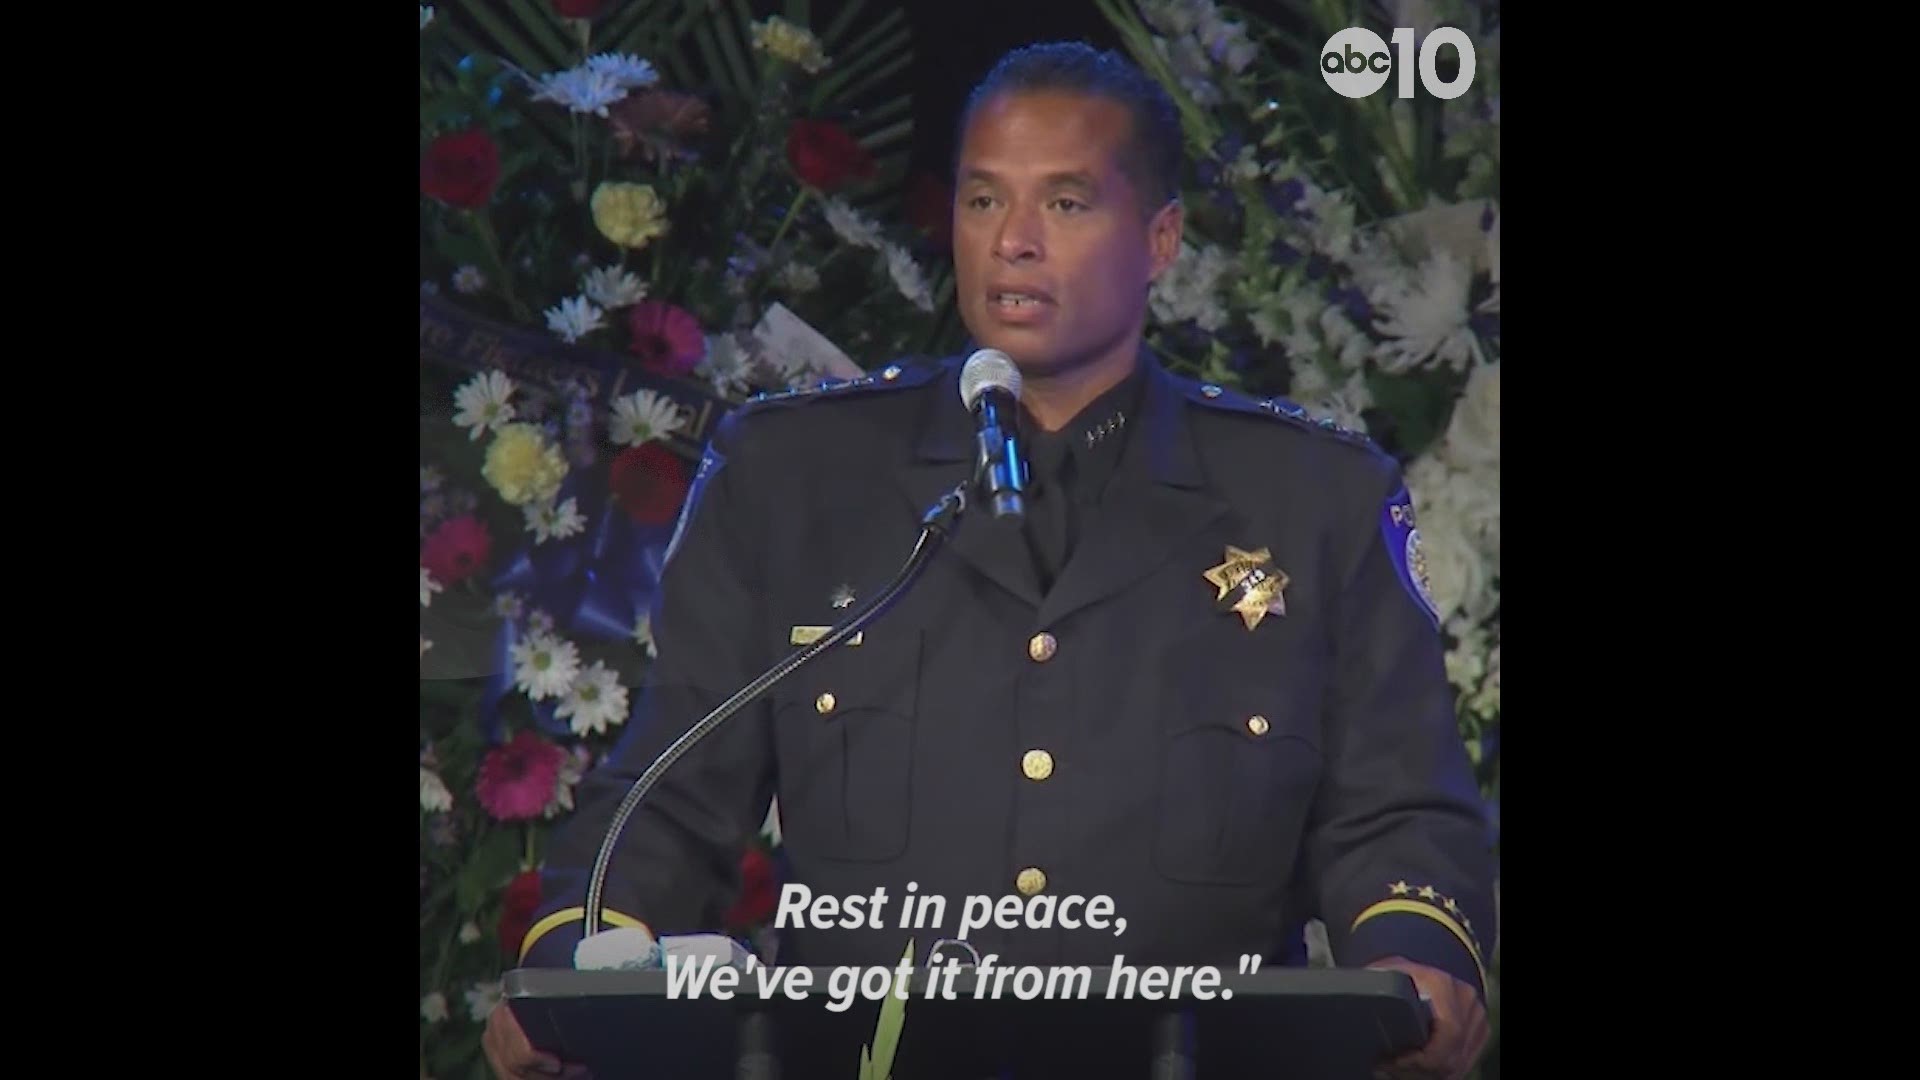 "The debt our department and community owes your family can never be repaid," Sacramento Police Chief Daniel Hahn said Thursday, telling the family of fallen Officer Tara O'Sullivan that the department will always be there for them when needed.